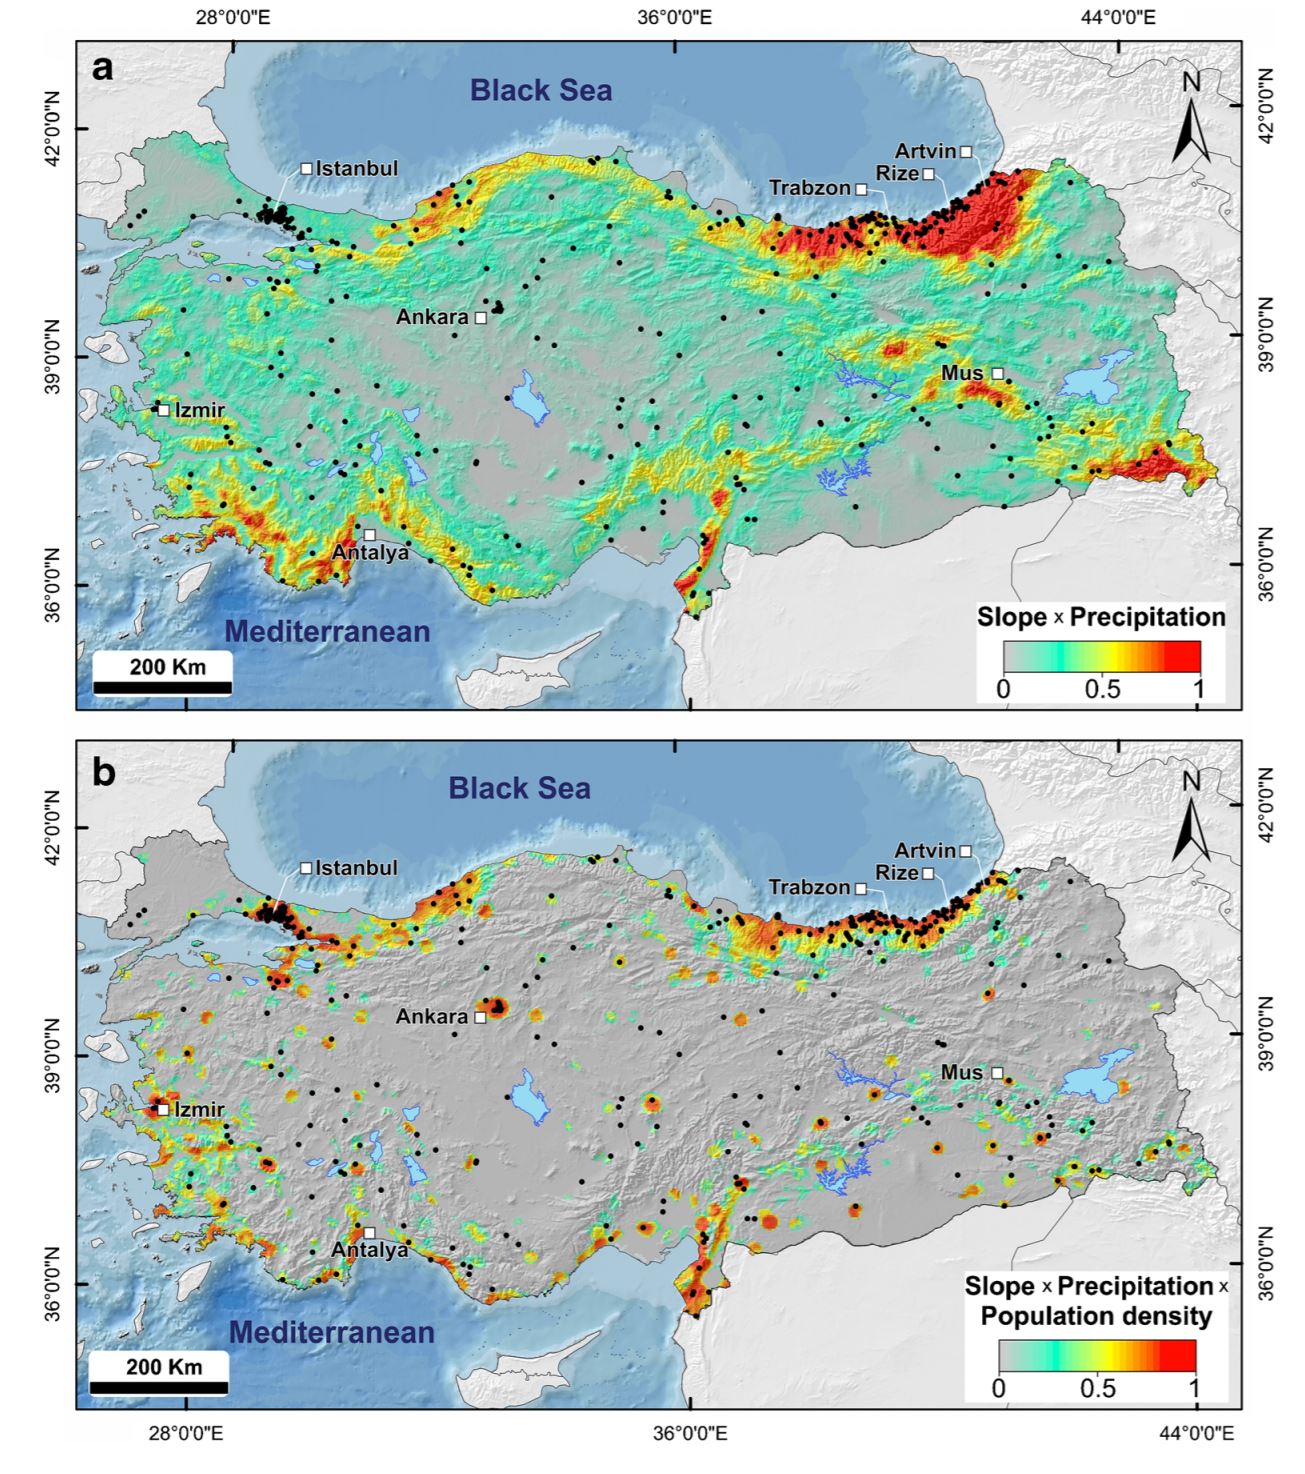 The natural and physical processes driving landslide losses in Turkey